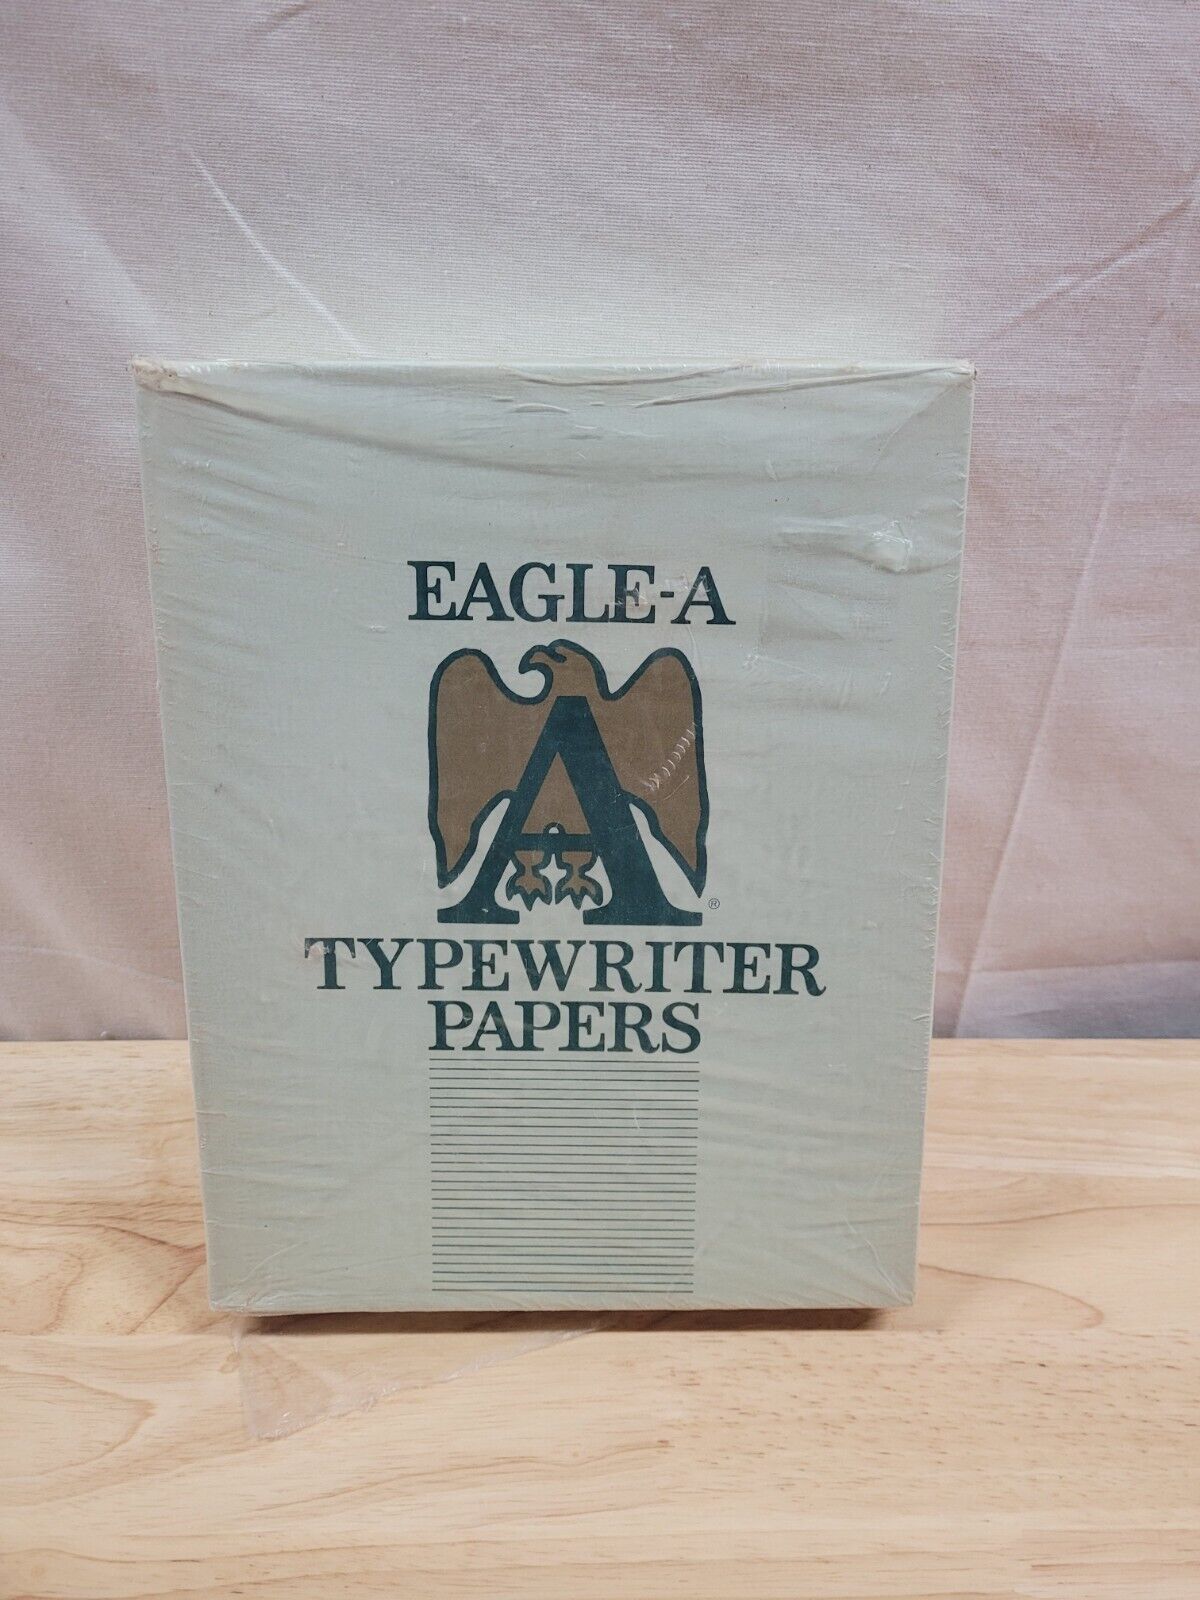 Eagle A Typewriter Papers Vintage New Sealed Wrapping Damage